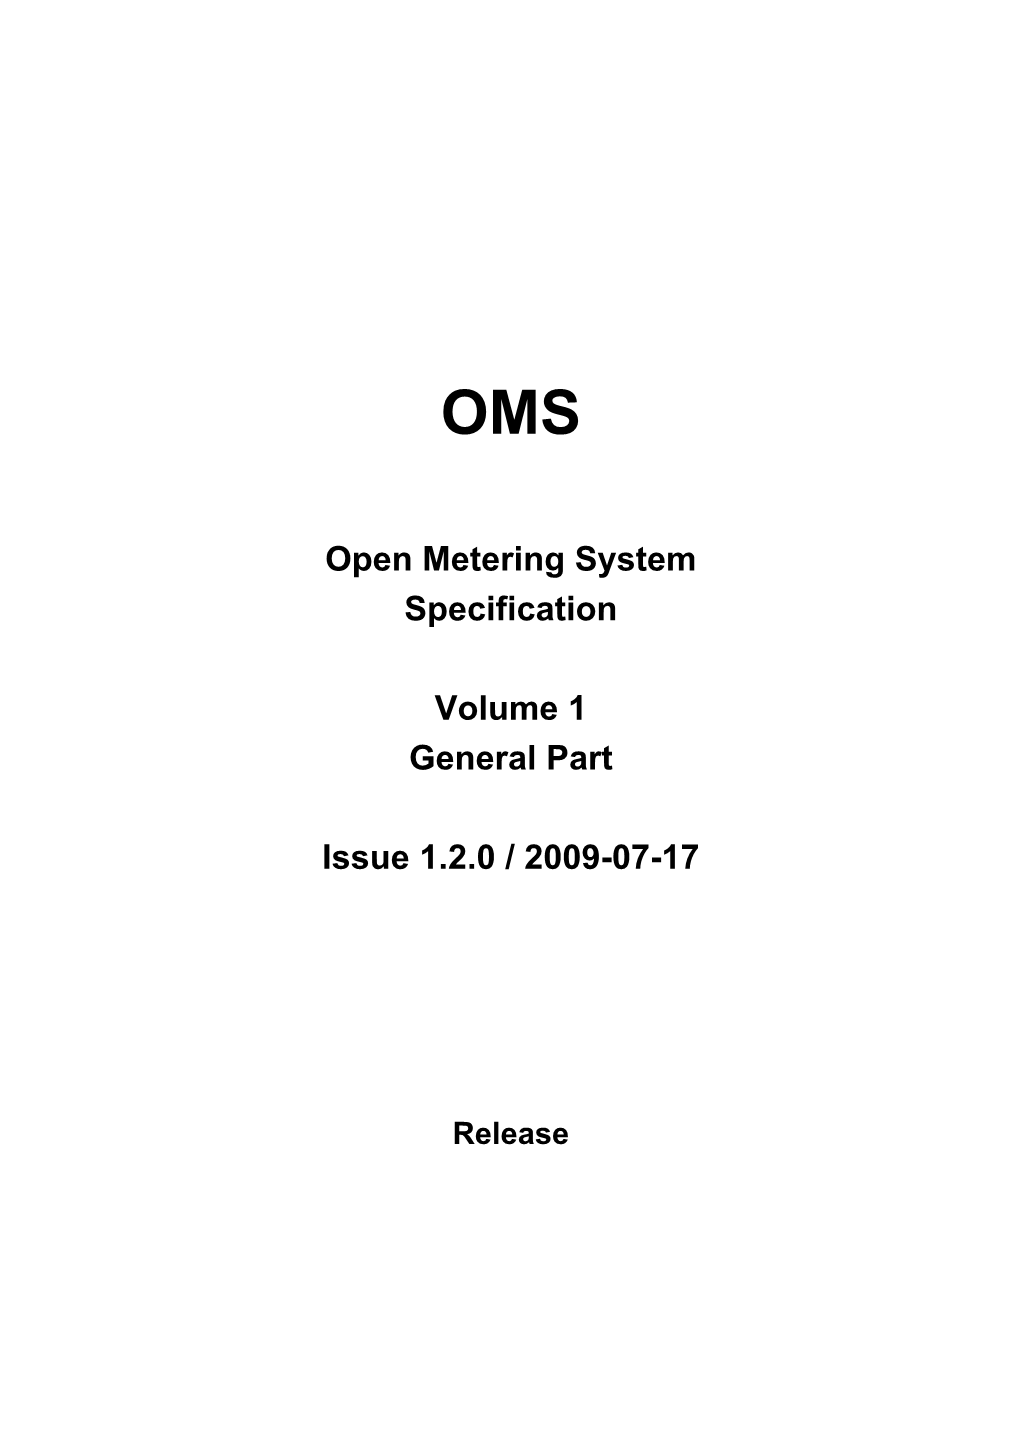 Open Metering System Specification Volume 1 General Part Issue 1.2.0